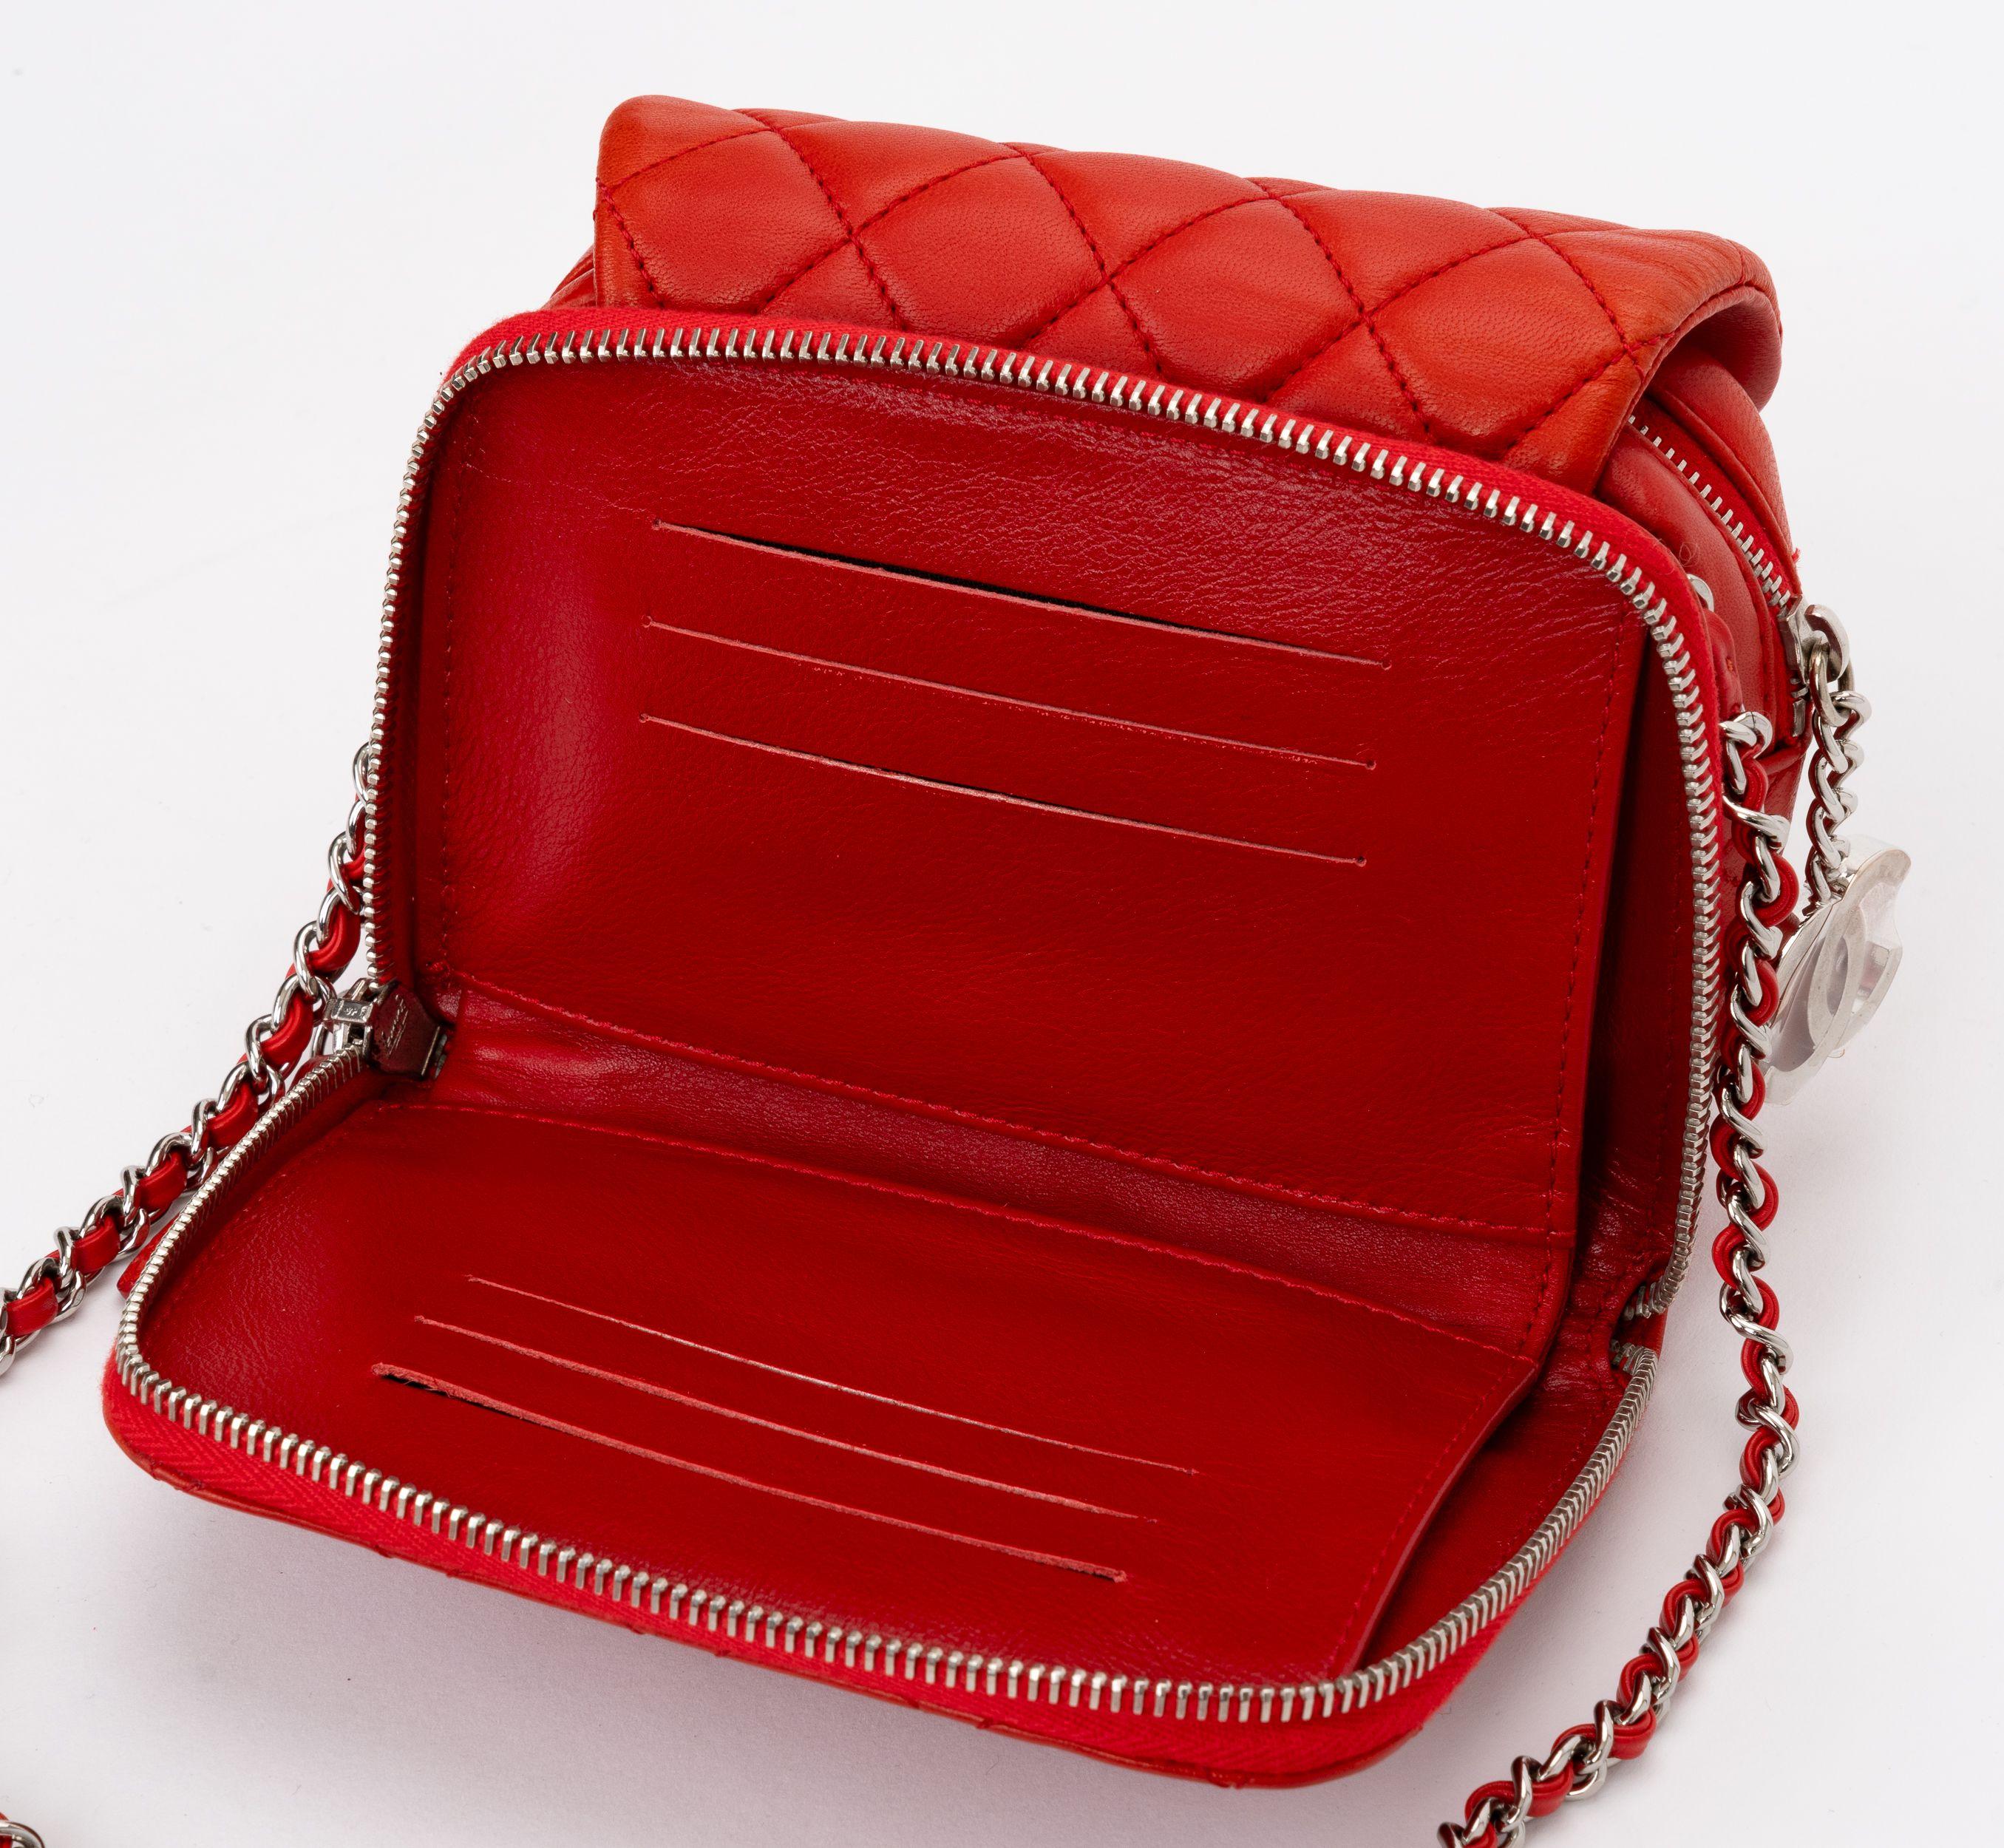 Chanel Red Leather Crossbody Flap Bag For Sale 2